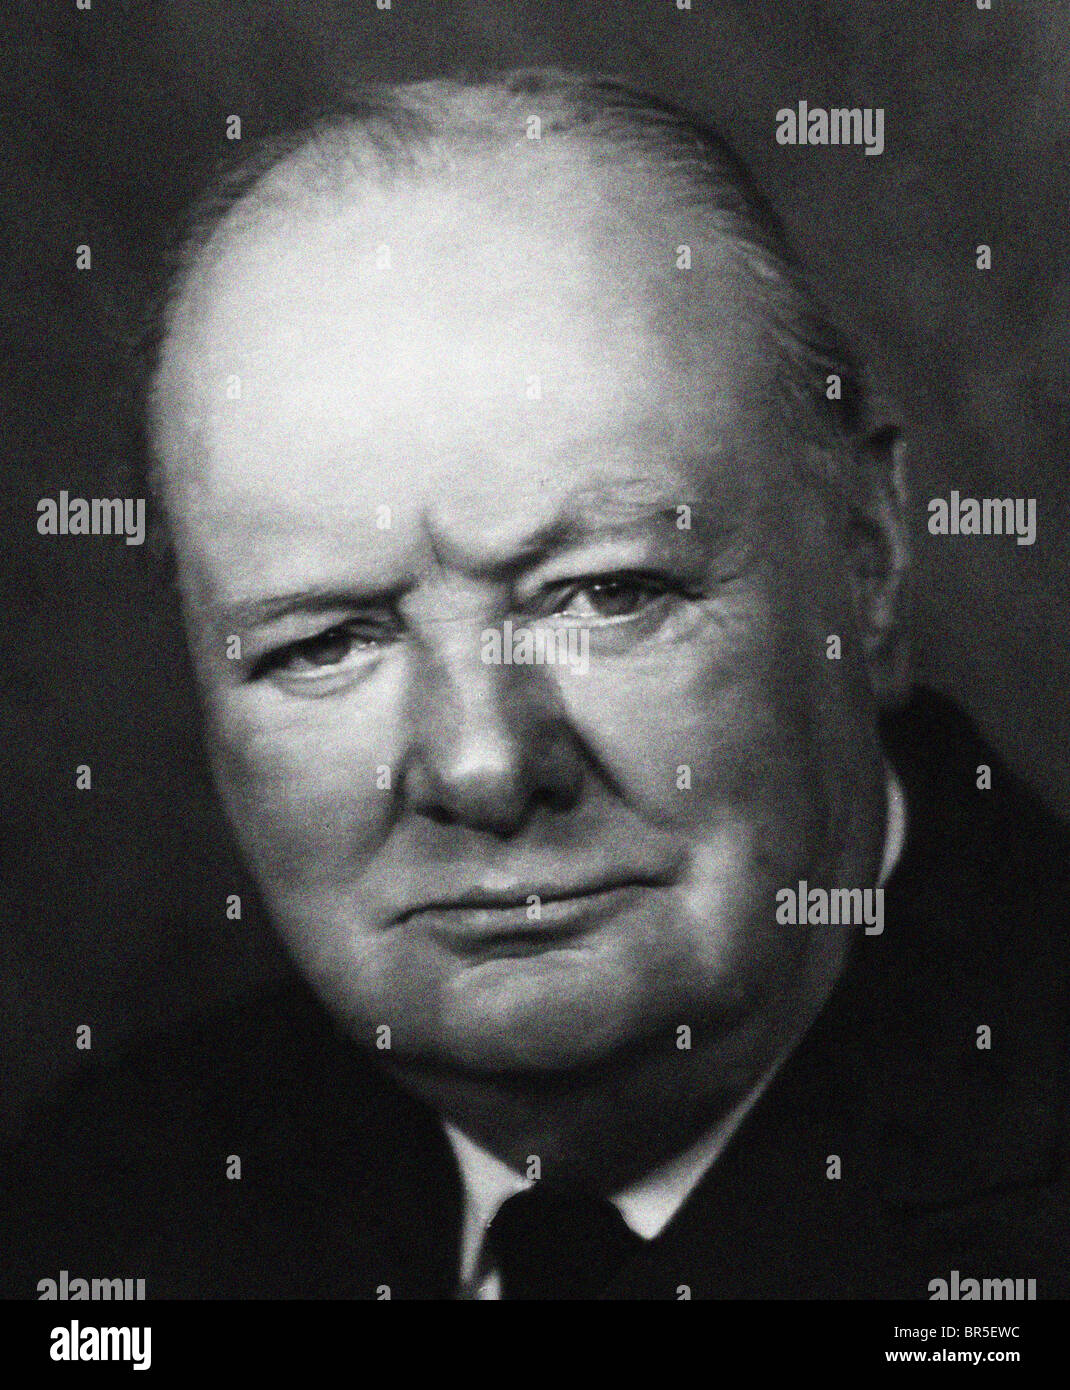 Winston Churchill was a politician and wartime prime minister who led ...